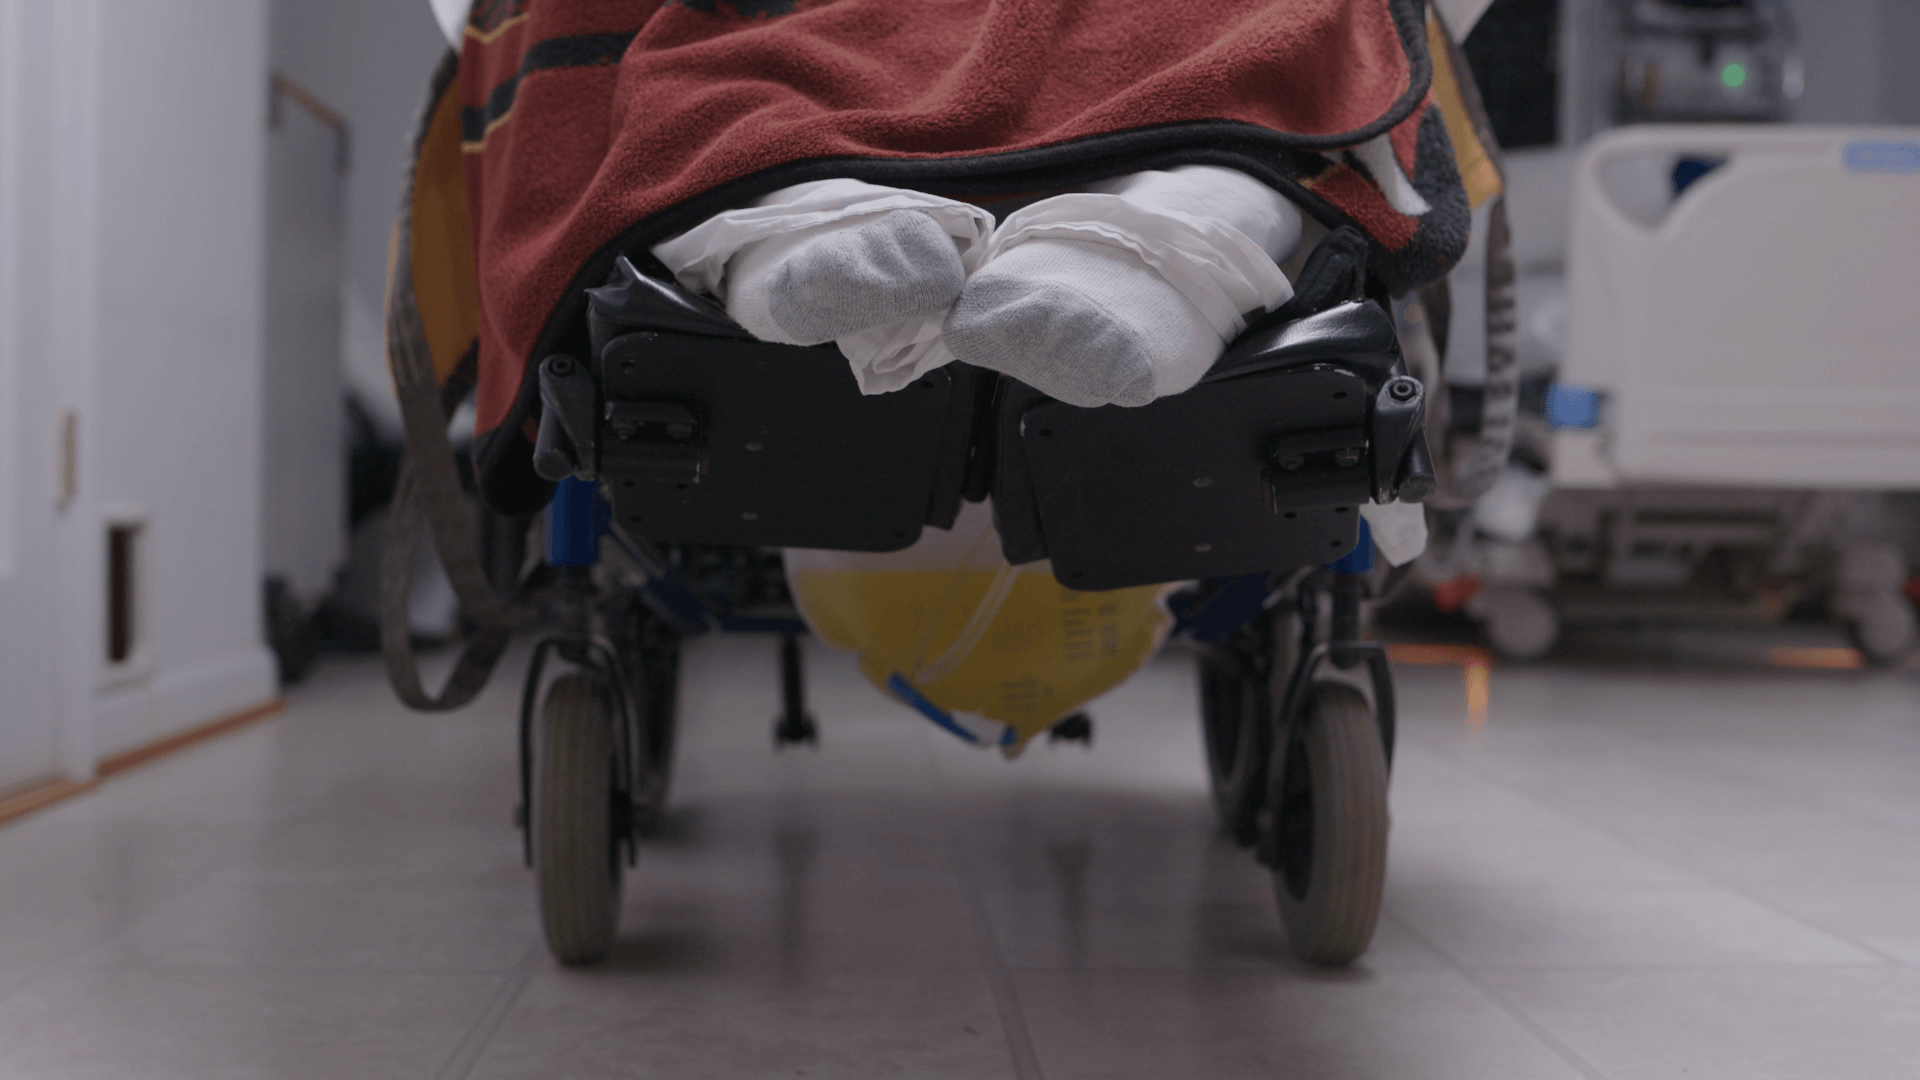 A photo of a person sitting in a wheelchair, only their feet are visible and they are wearing white socks. A red blanket over their lap.